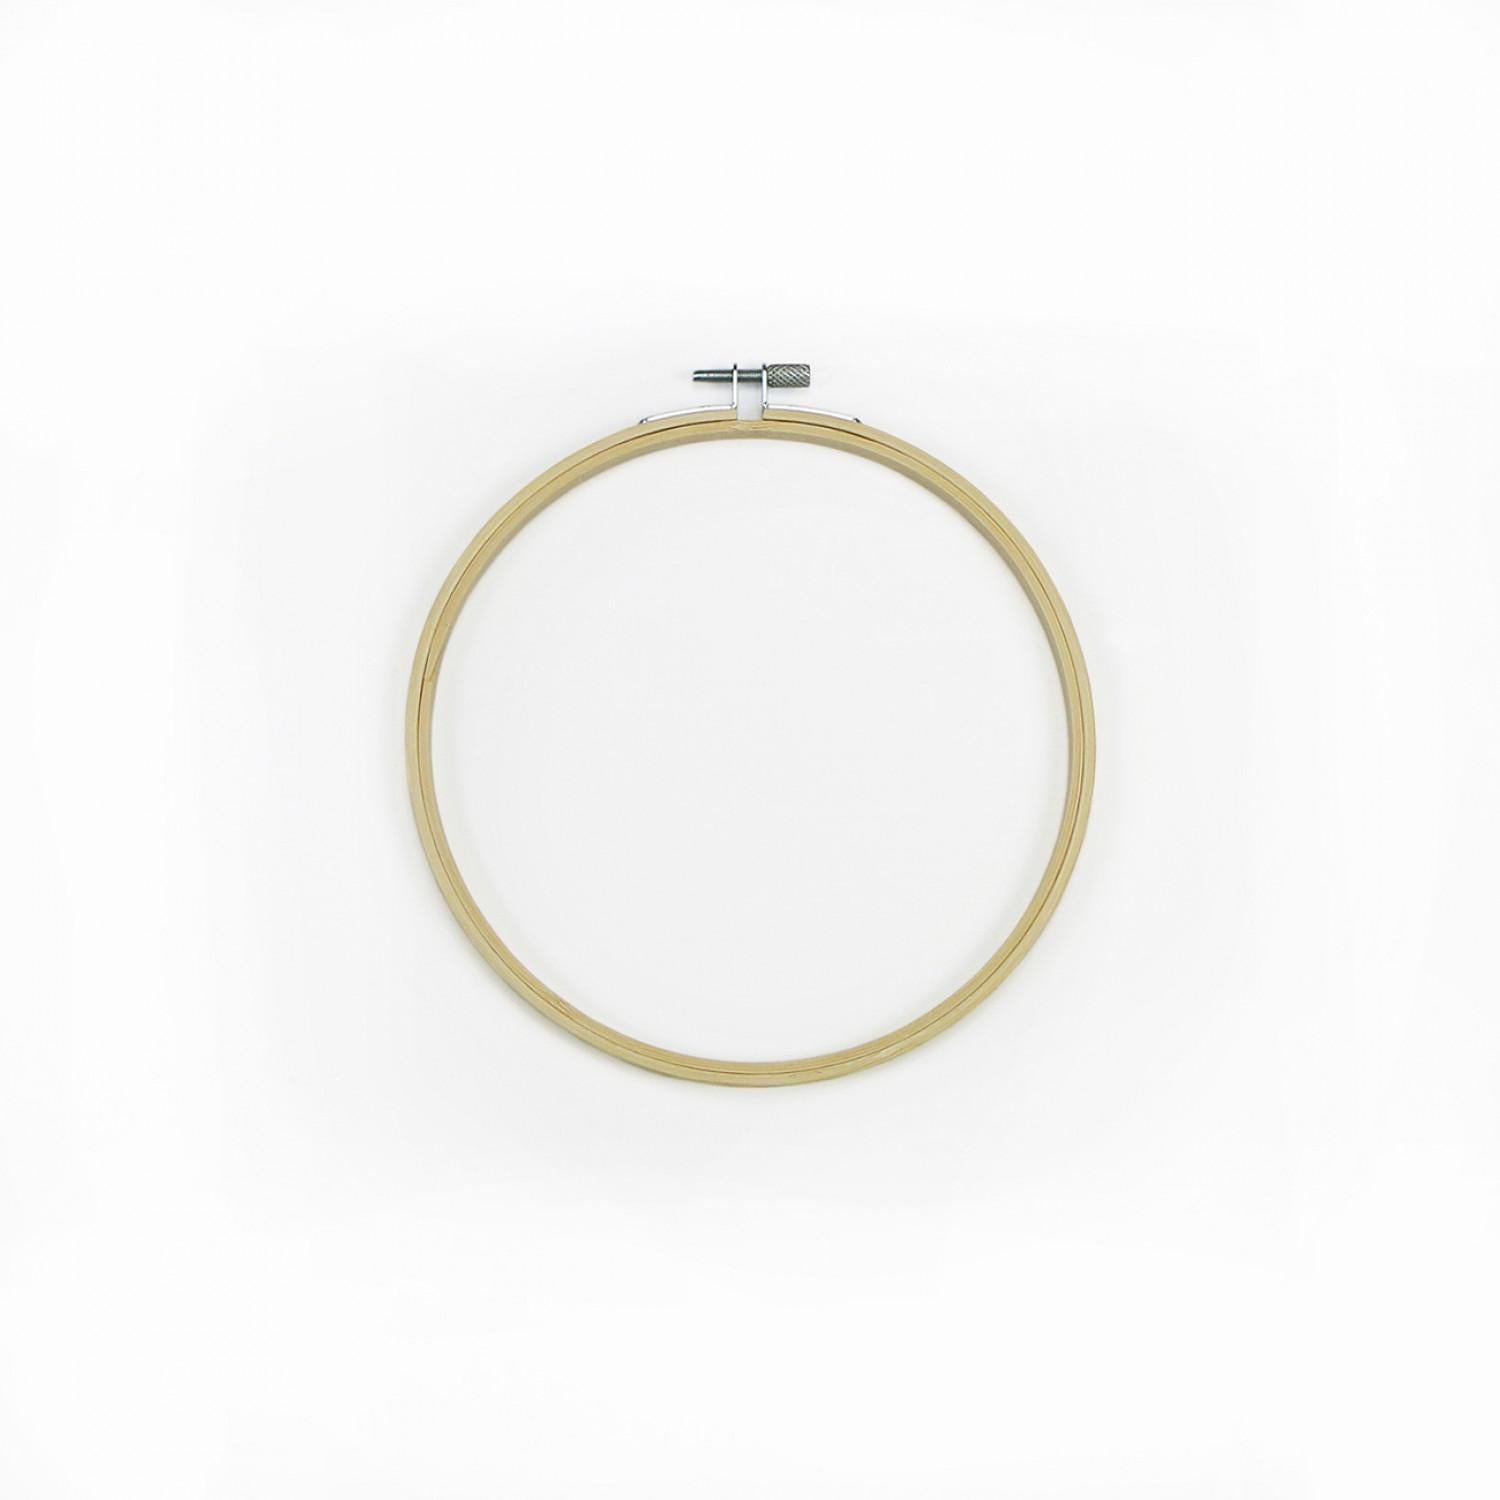 Bamboo Embroidery hoop 7 in